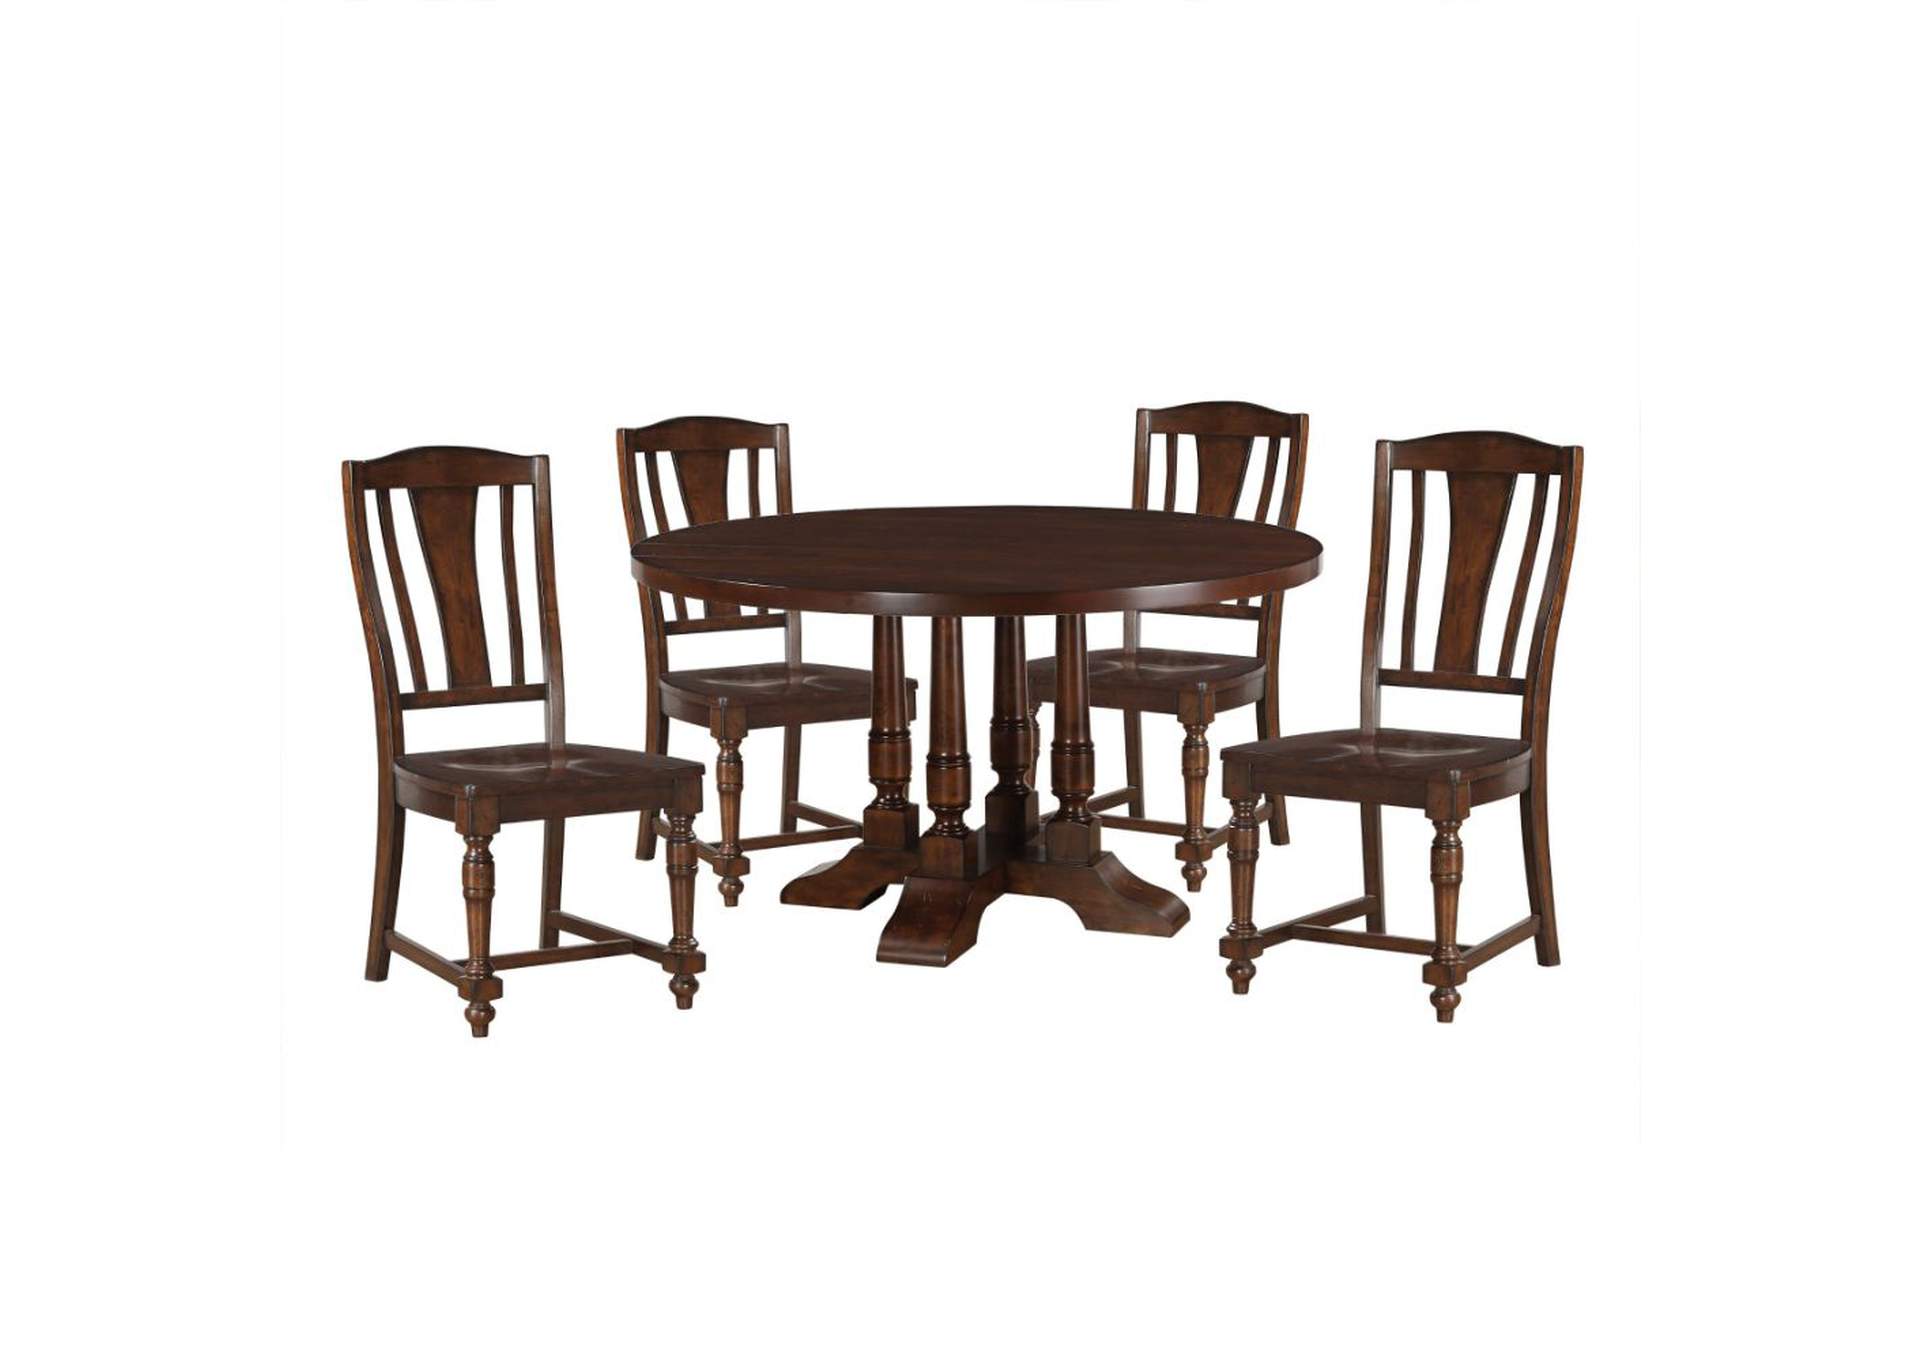 Tanner Dining Table,Acme